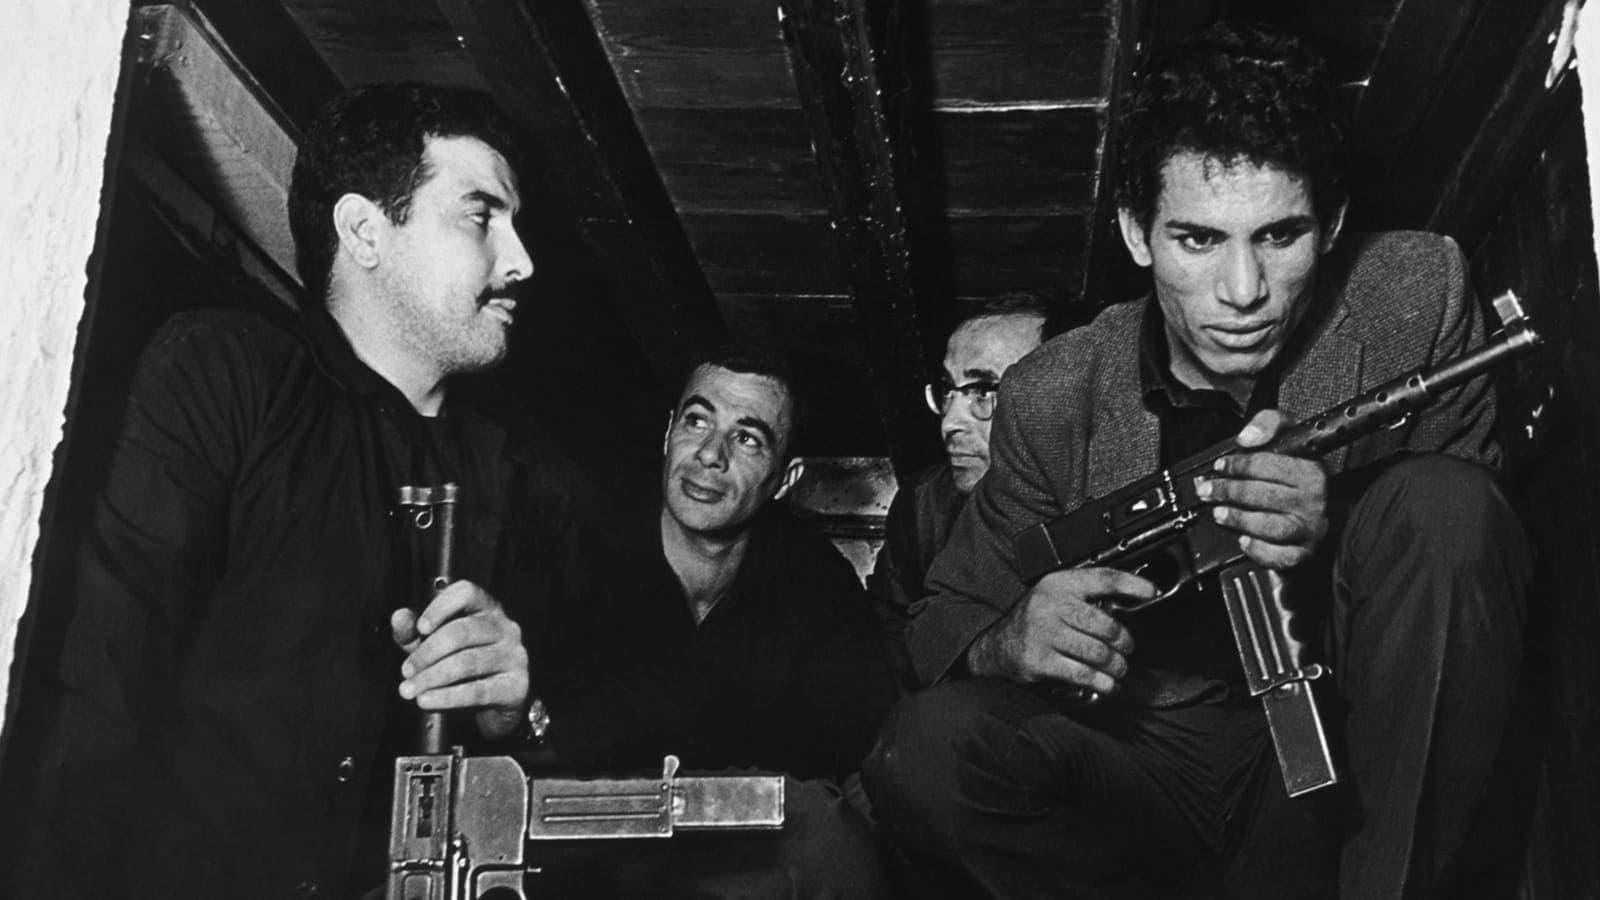 Marxist Poetry: The Making of The Battle of Algiers backdrop